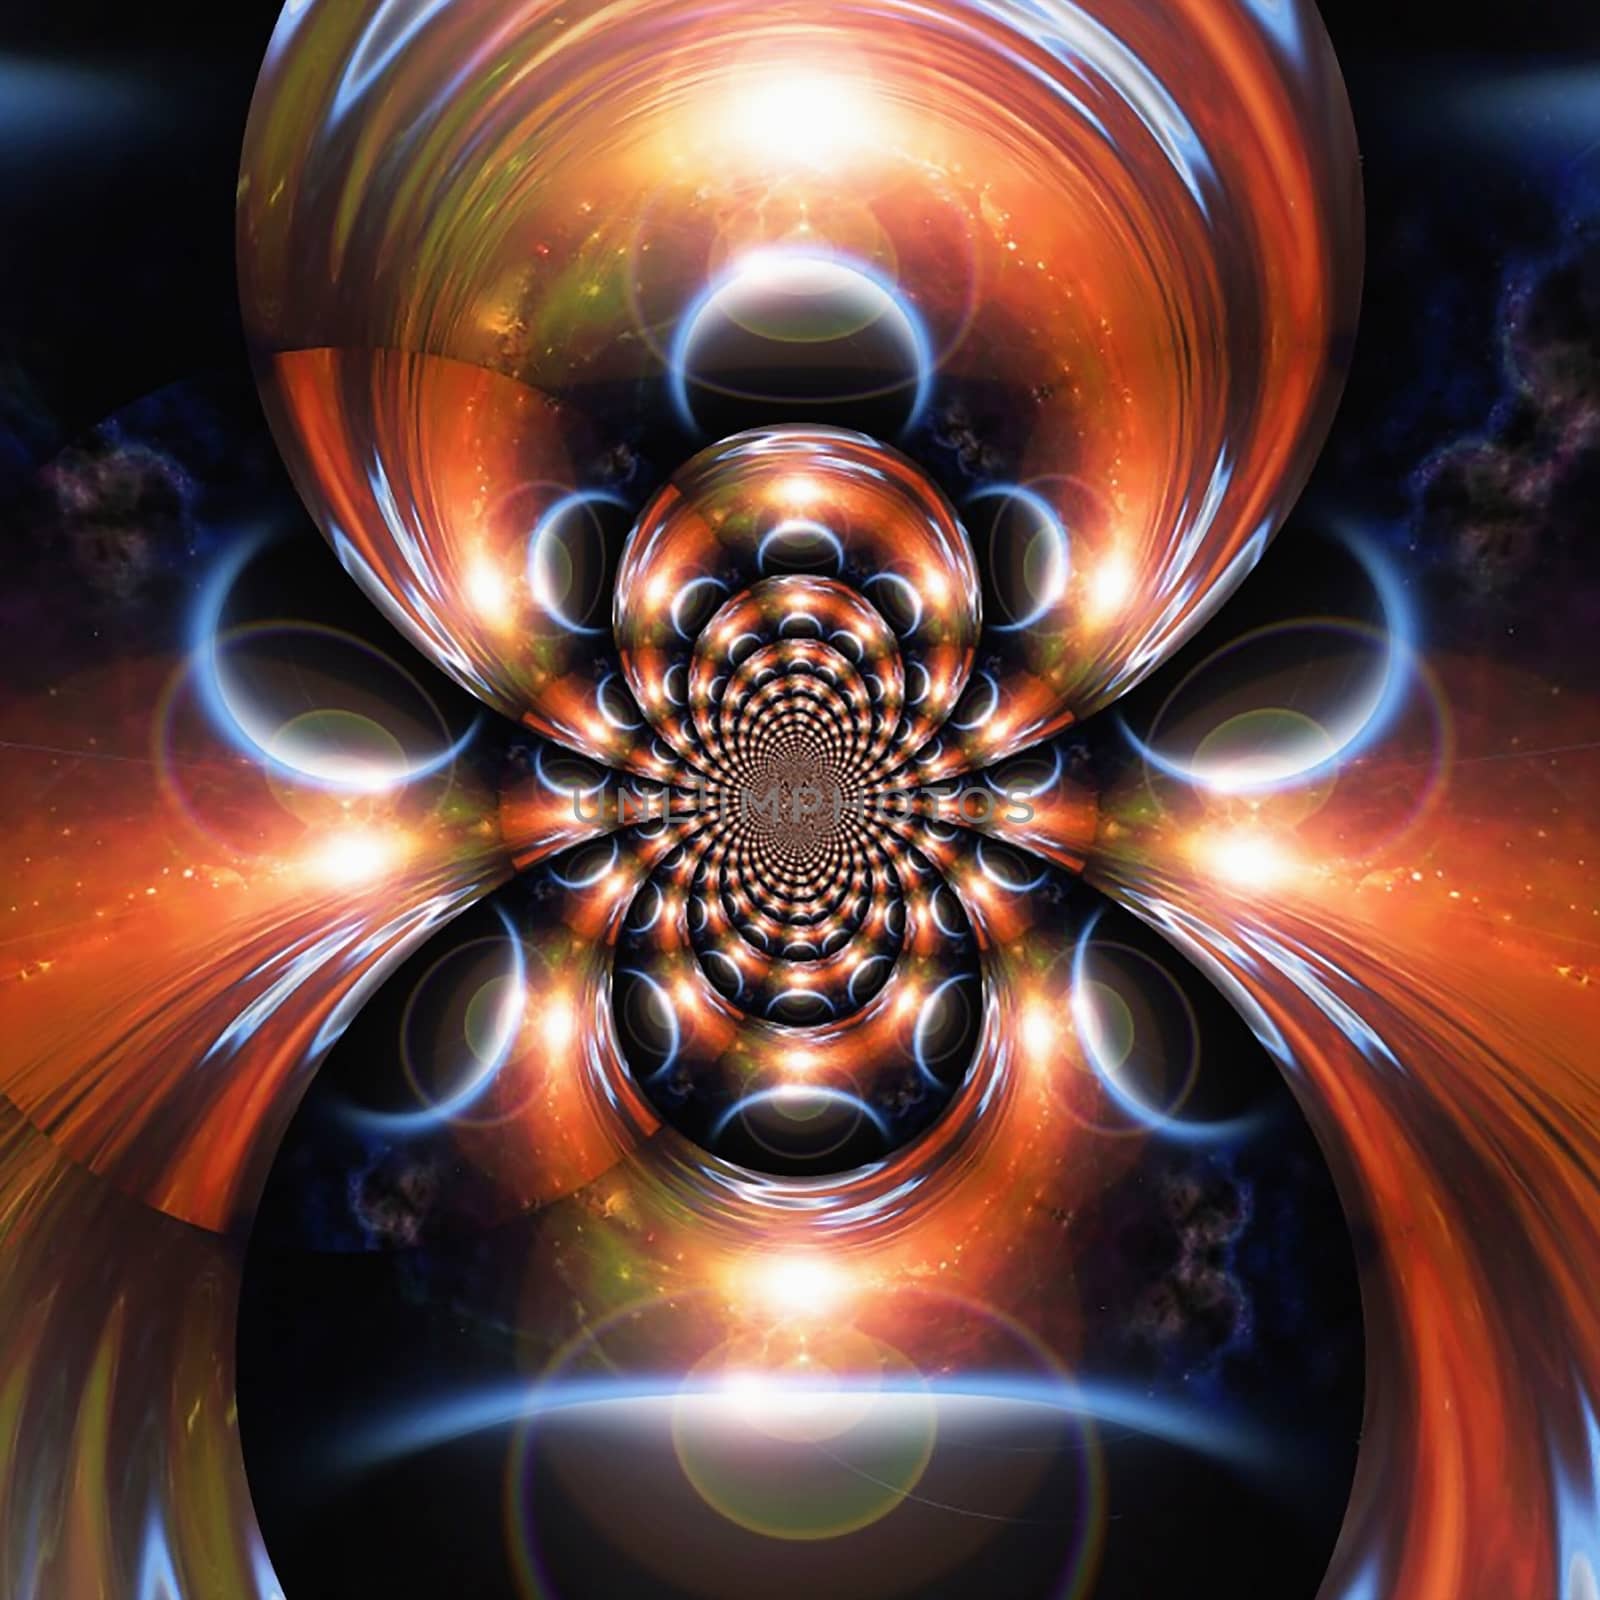 Eclipse fractal by applesstock